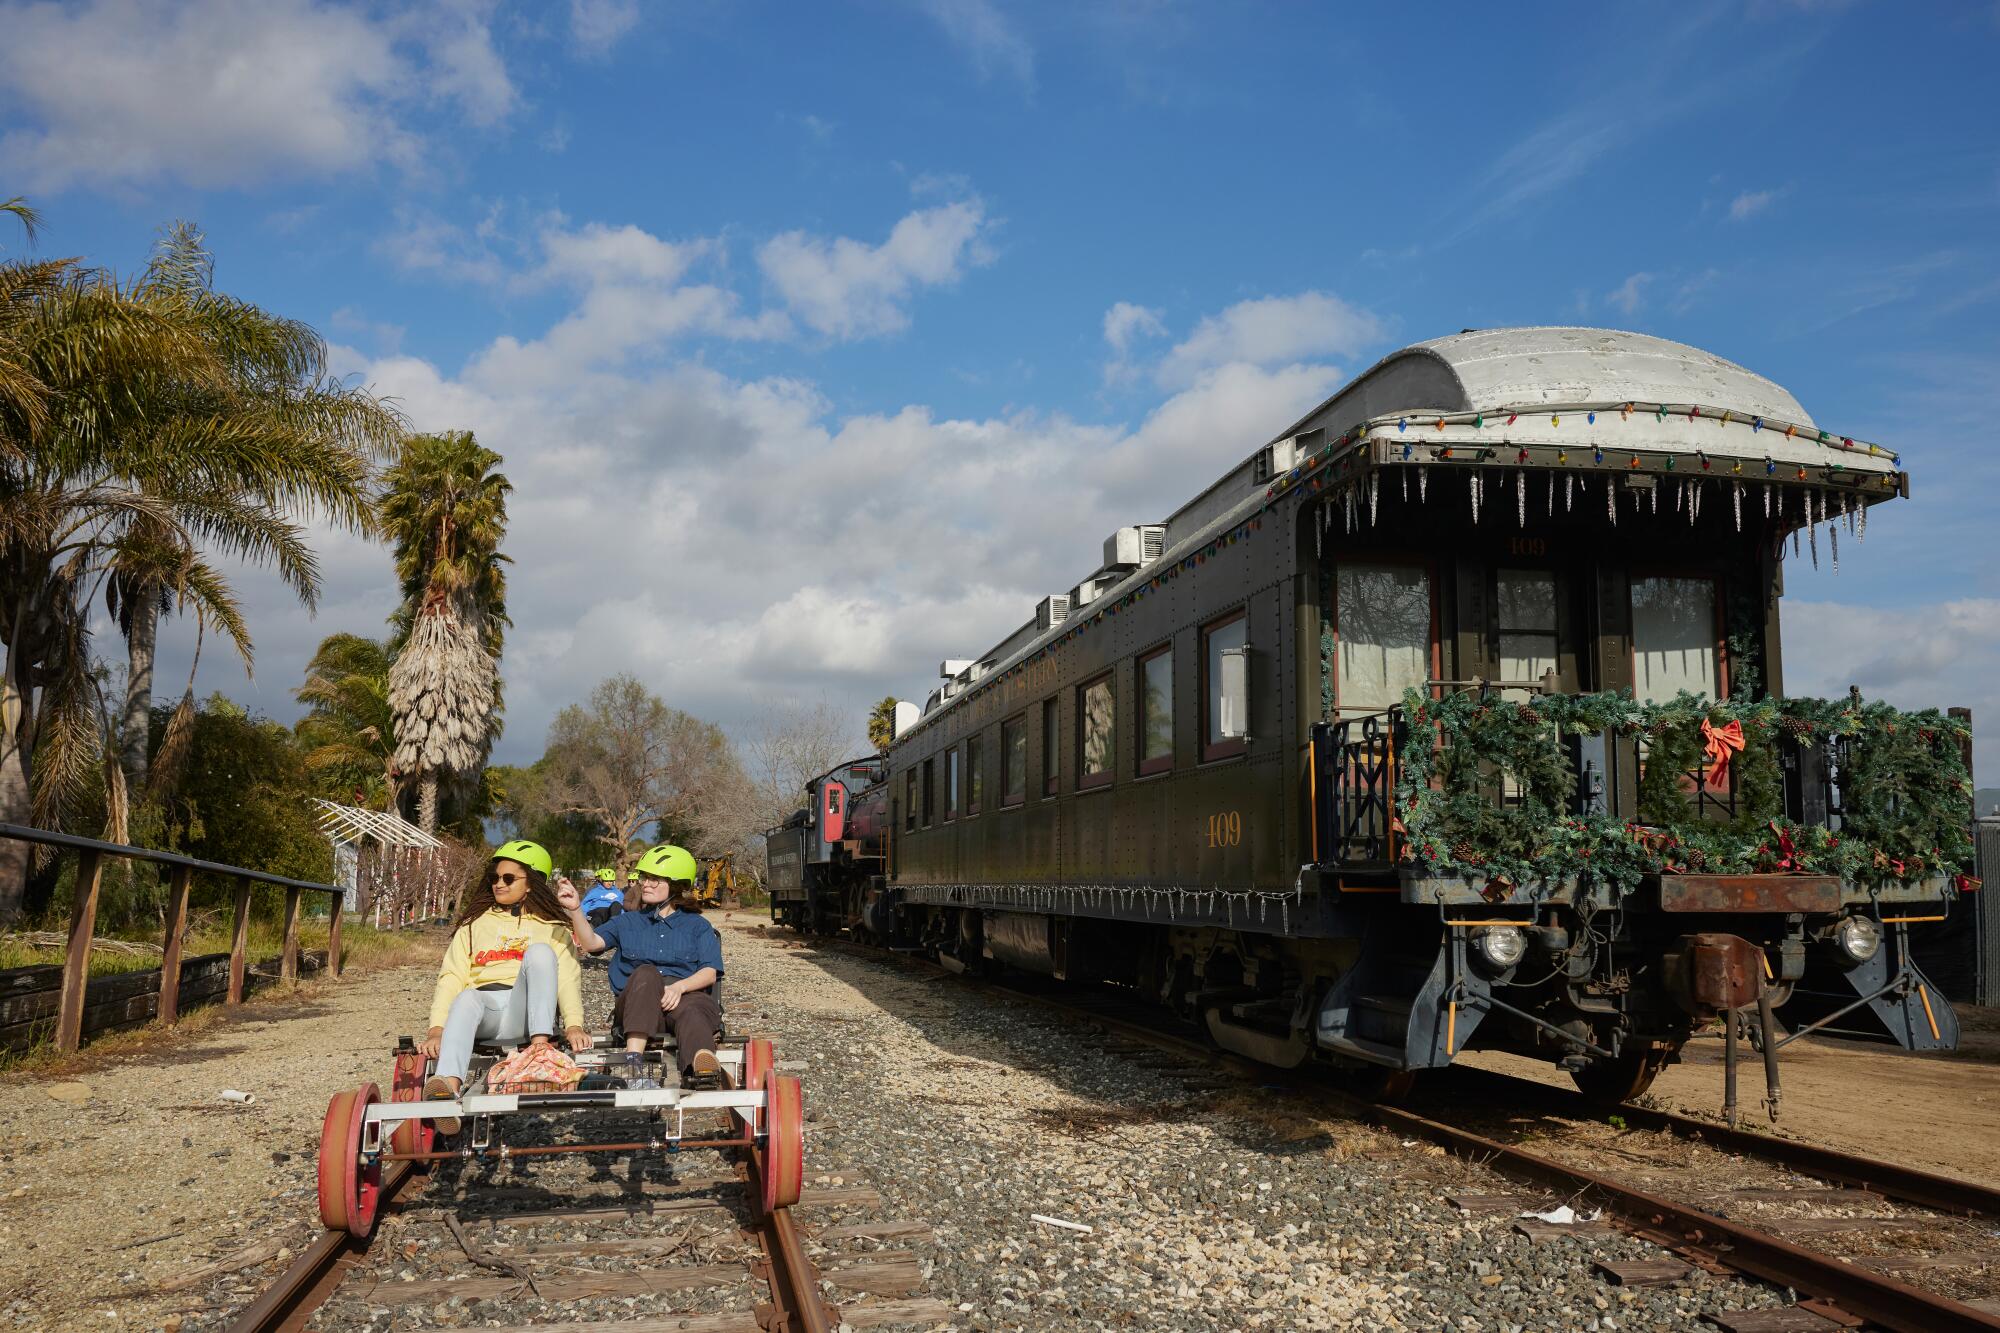 A photo of two people on a railbike, passing by a large train car decorated with lights and wreaths on a sunny day.